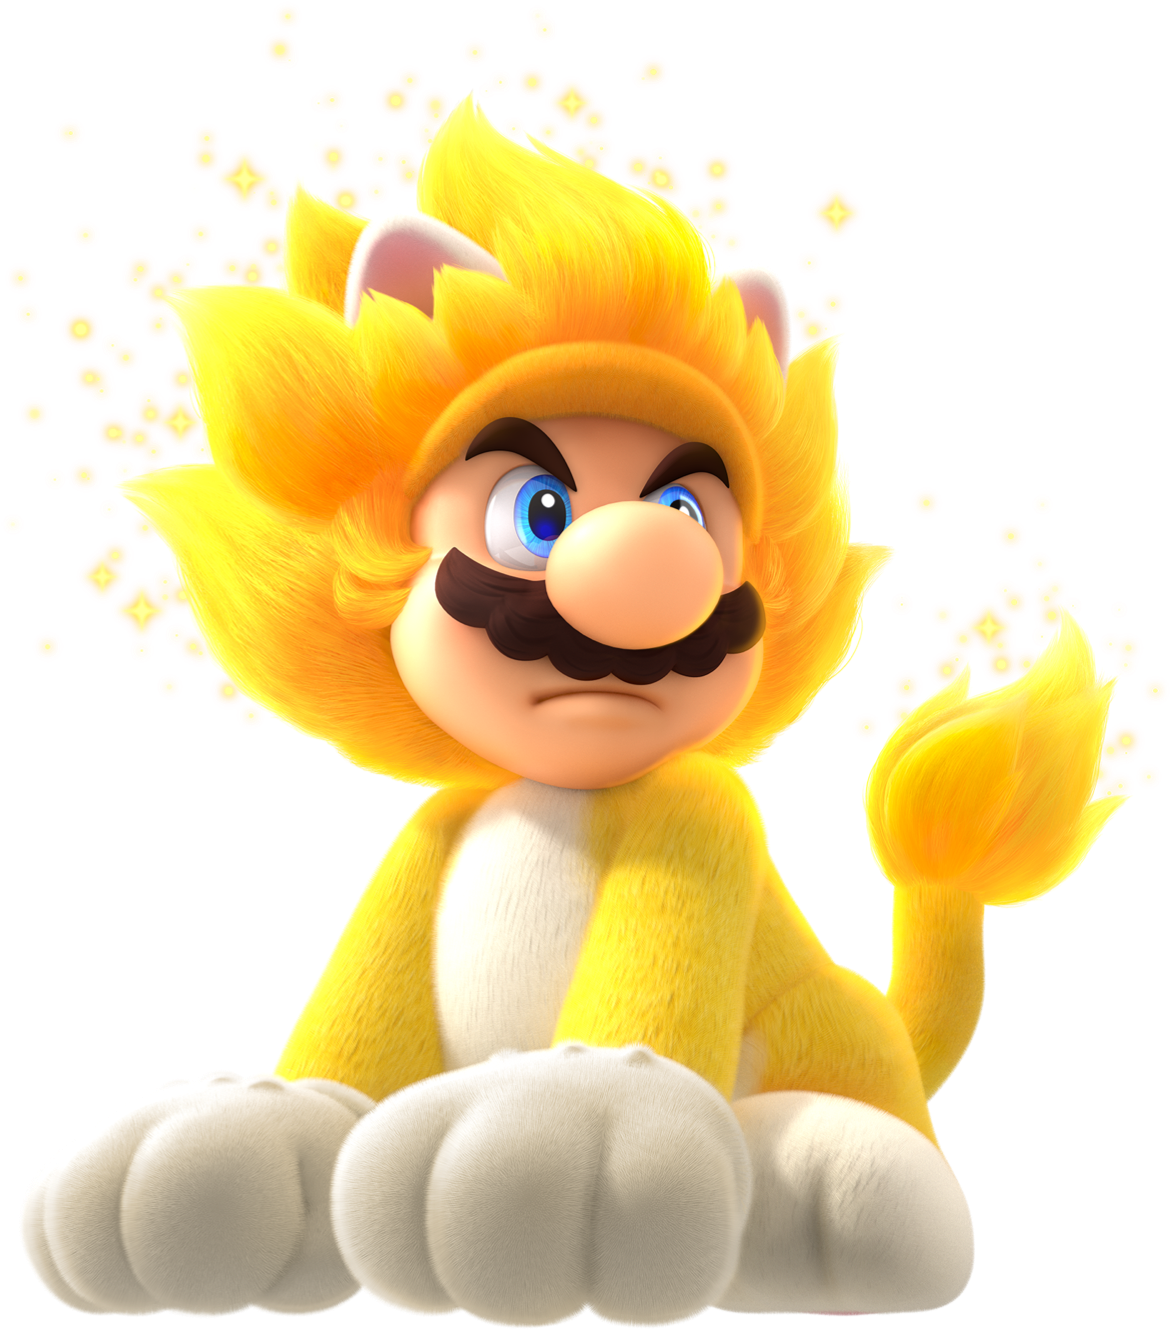 Giga Cat Mario Render from Bowser's Fury